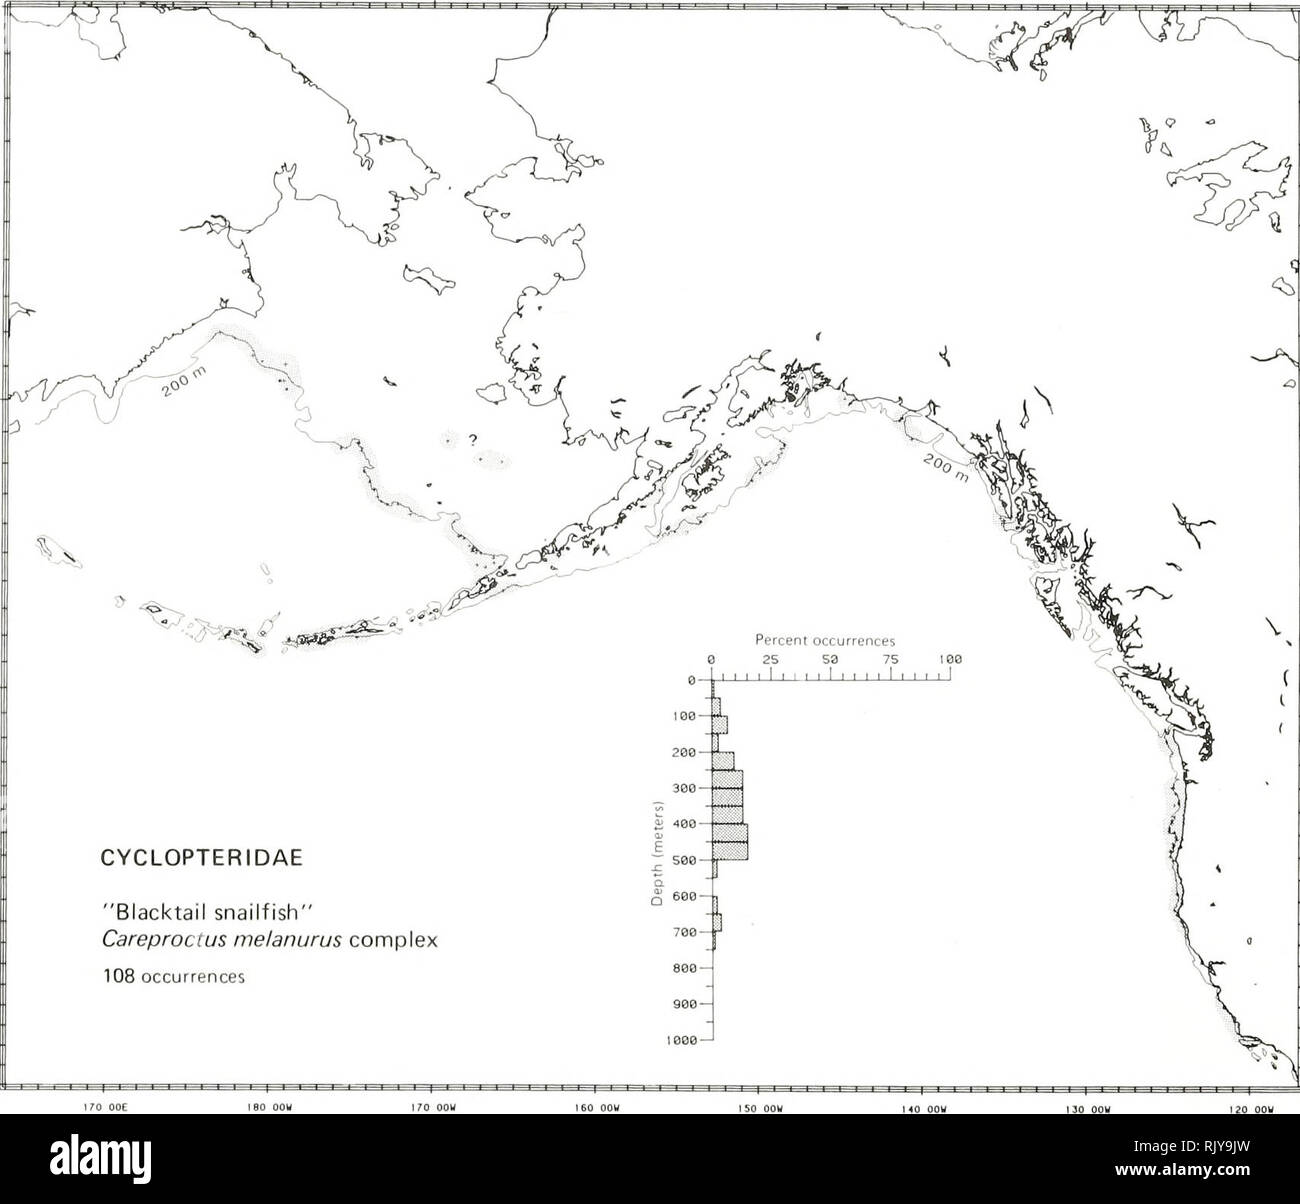 . Atlas and zoogeography of common fishes in the Bering Sea and Northeastern Pacific / M. James Allen, Gary B. Smith. Fishes Bering Sea Geographical distribution.. &quot;BLACKTAIL SNAILFISH,&quot; Careproctus melanurus Complex Cyclopteridae: Lumpfishes and Snailflshes Taxonomic comment This complex may include four species that have been called &quot;blacktail snailfish&quot; in the field, including the following: Alaska snailfish, Careproctus colletti Gilbert 1896; blackfinned snailfish, C. cypselurusQordan and Gilbert 1898 in Jordan and Evermann); forktail snailfish, C. furcellus Gilbert and Stock Photo